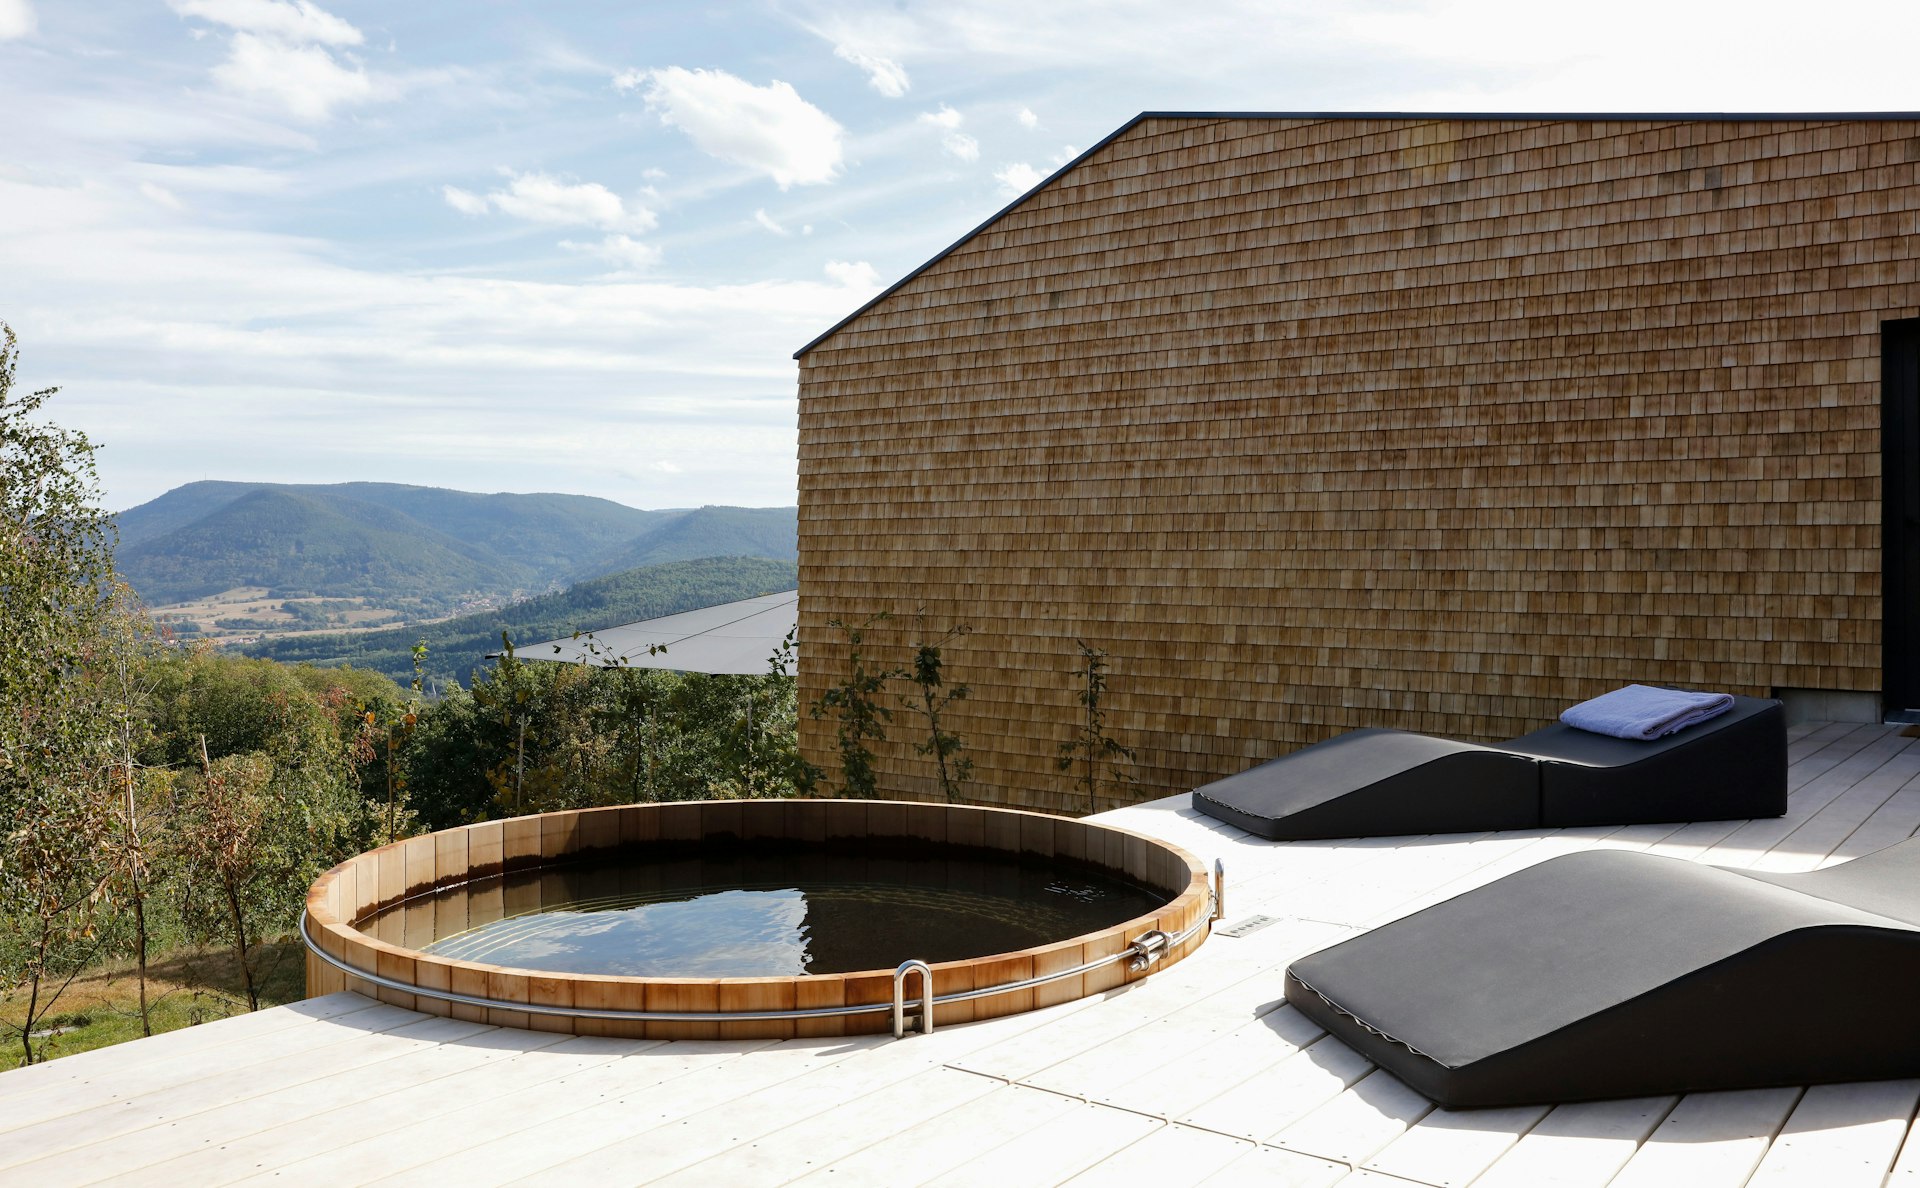 The panoramic Nordic bath of the wellness area at the 48° Nord hotel in Breitenbach, Alsace